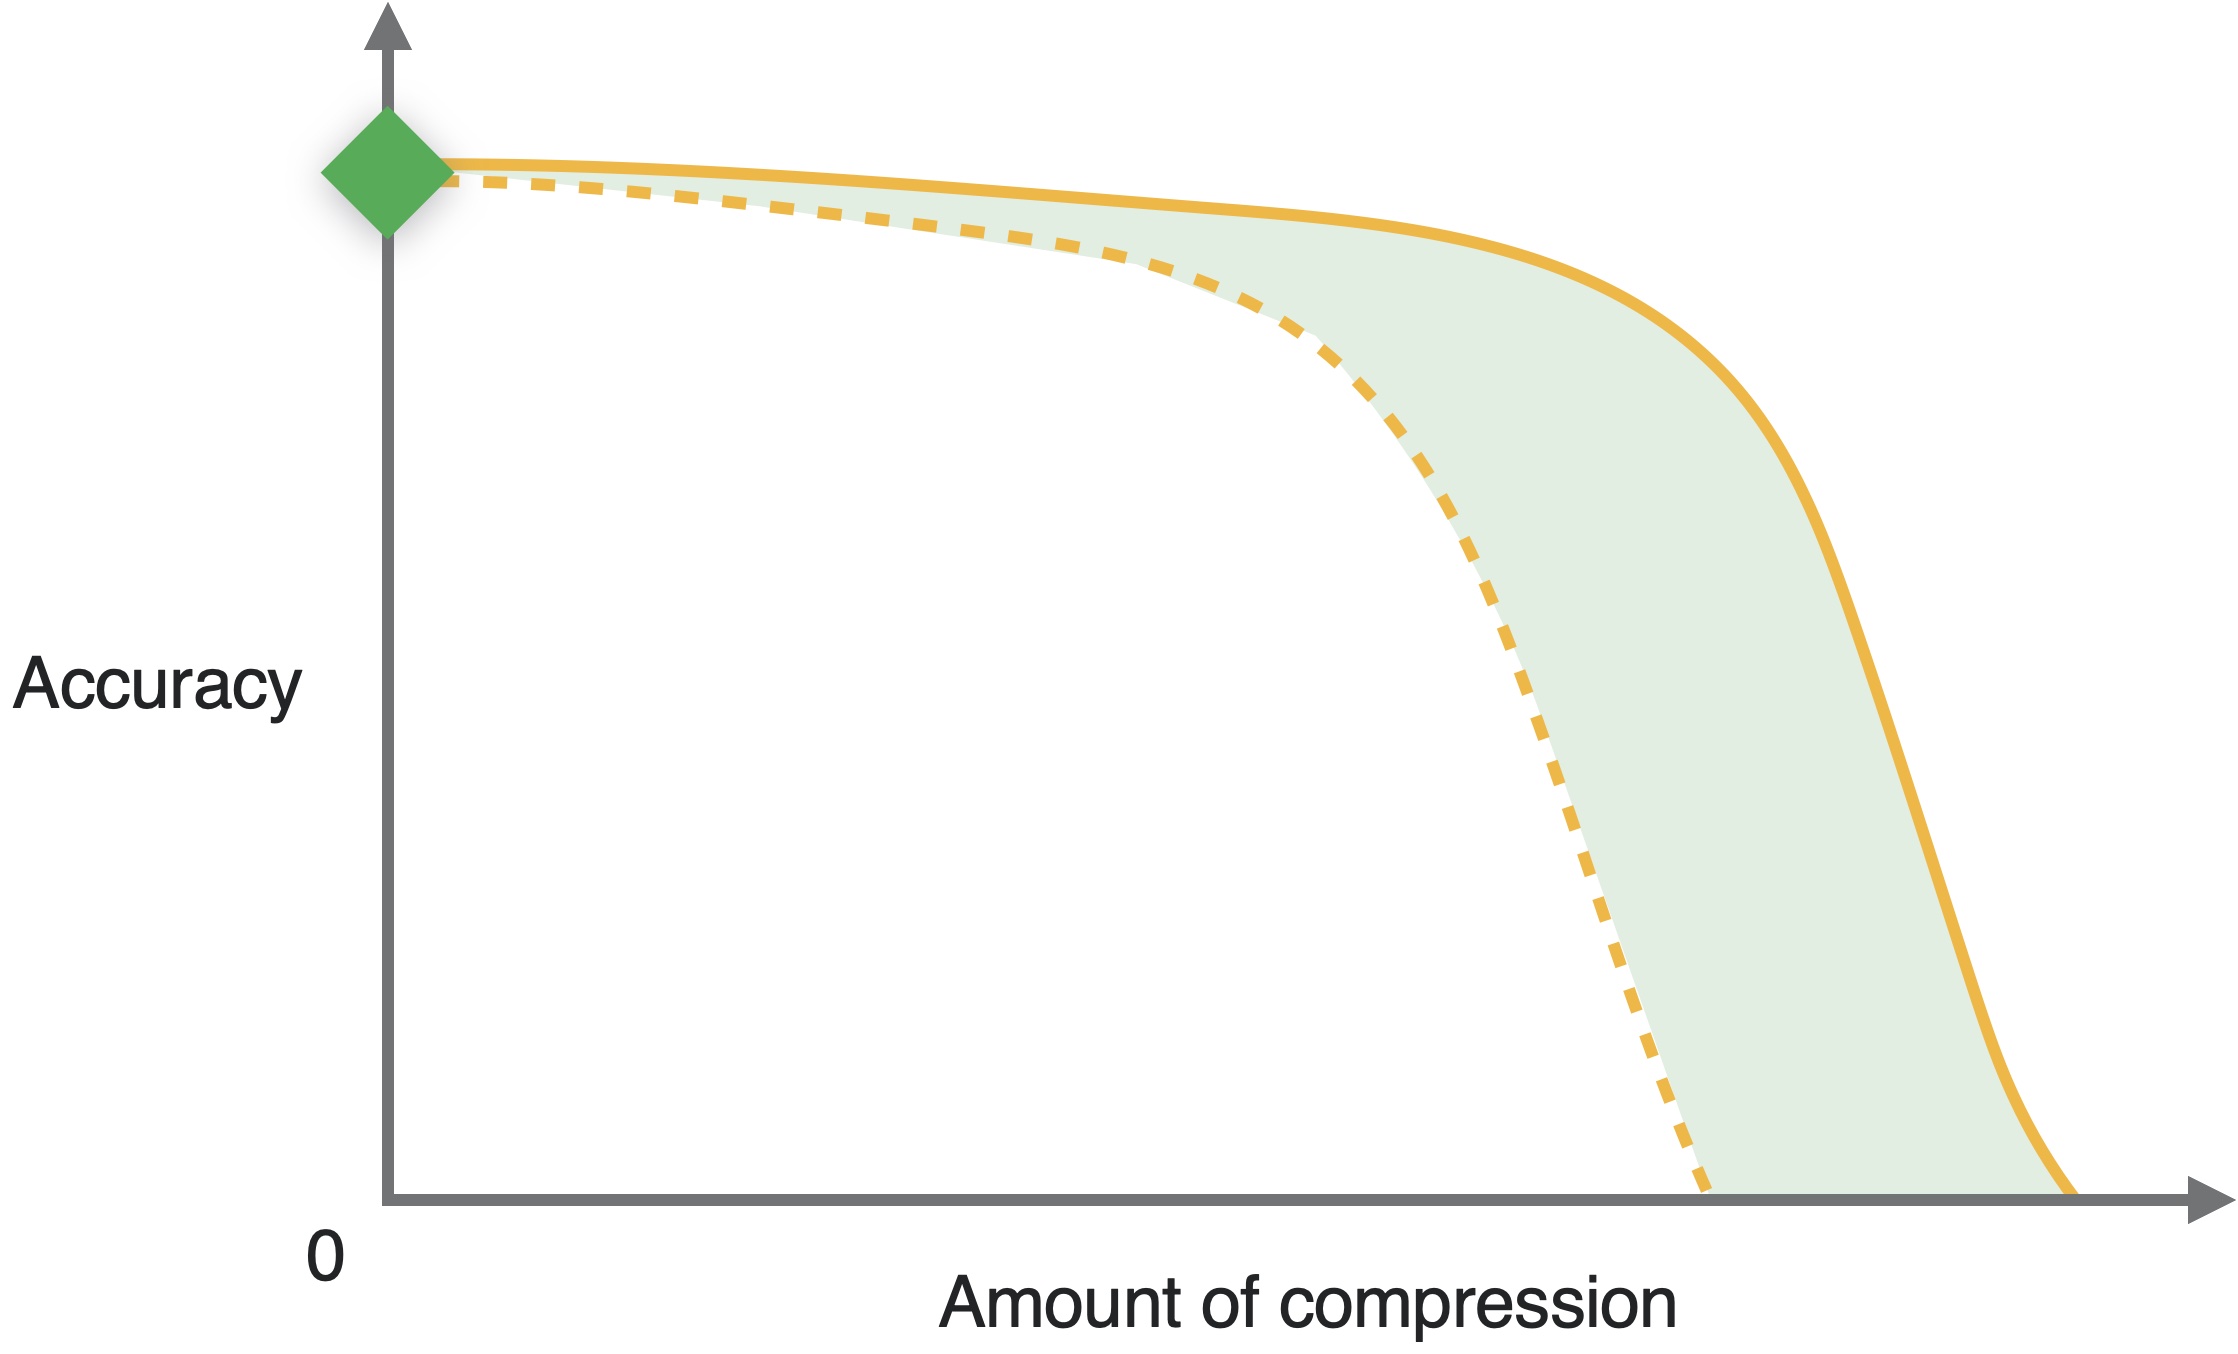 A hypothetical "accuracy-compression amount" trade-off curve. The dotted curve corresponds to data free compression, while the solid curve represents training time compression